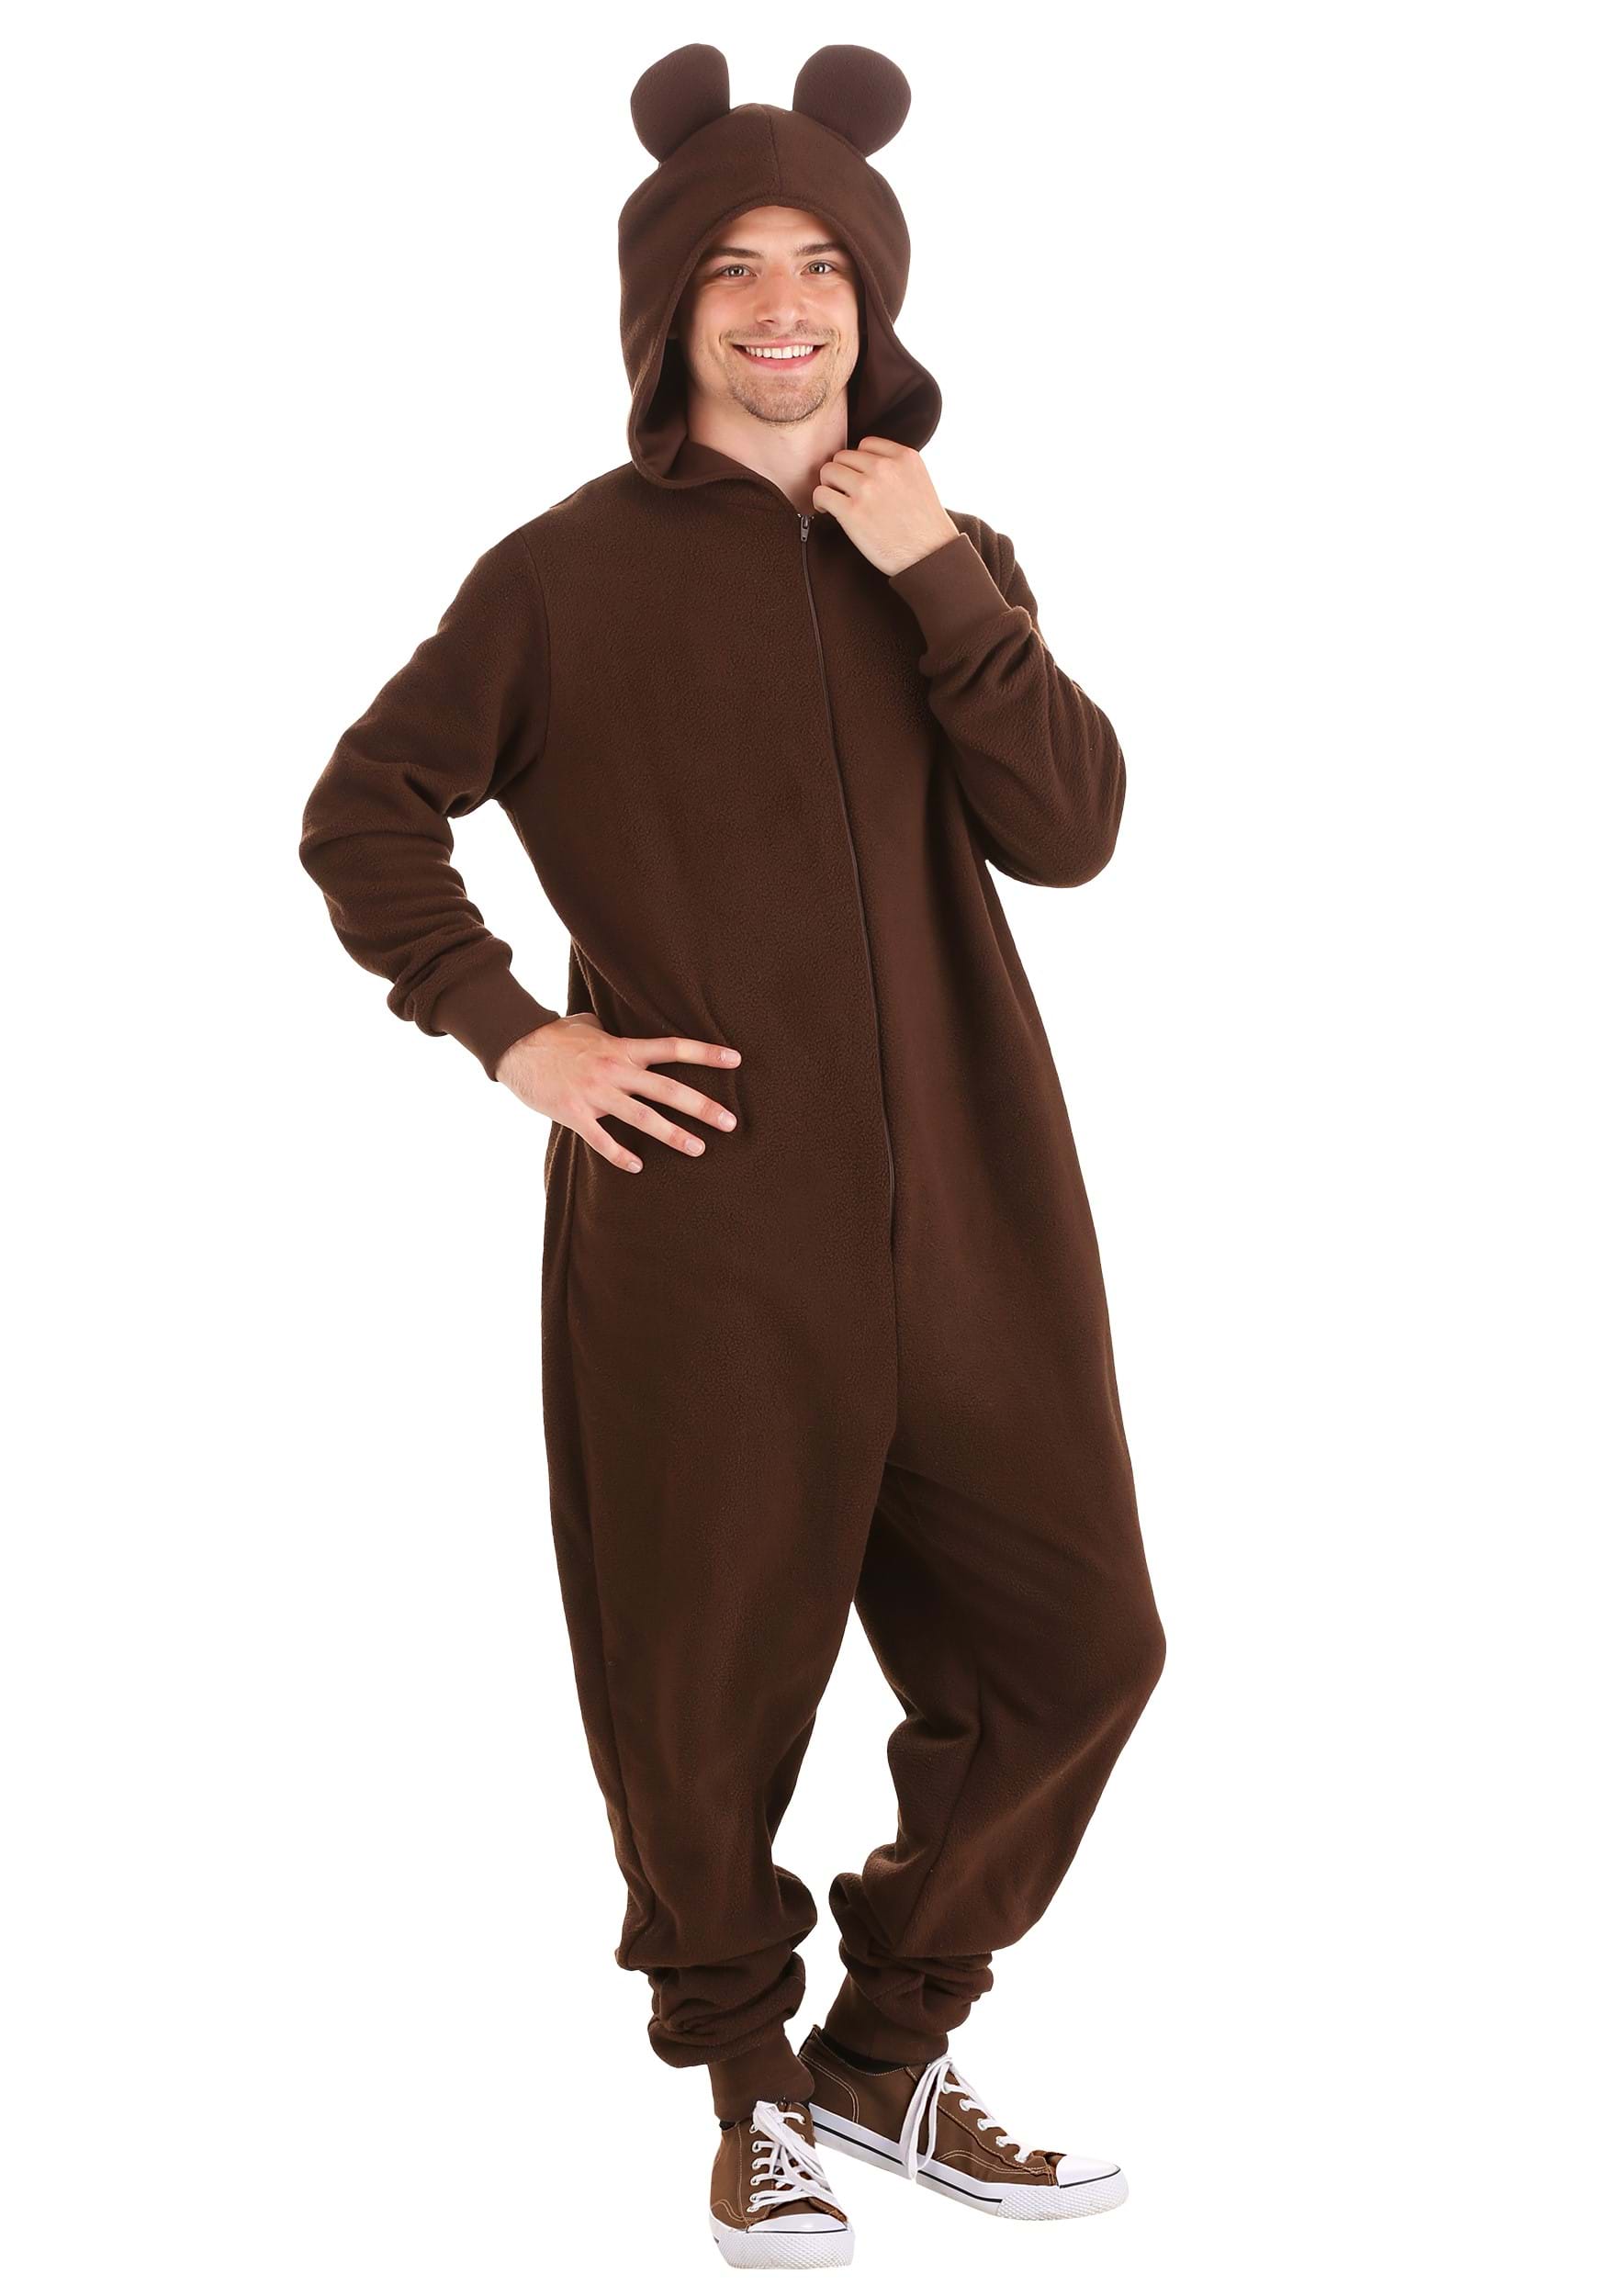 Bear Onesie Costume For Adults , Adult Animal Costumes